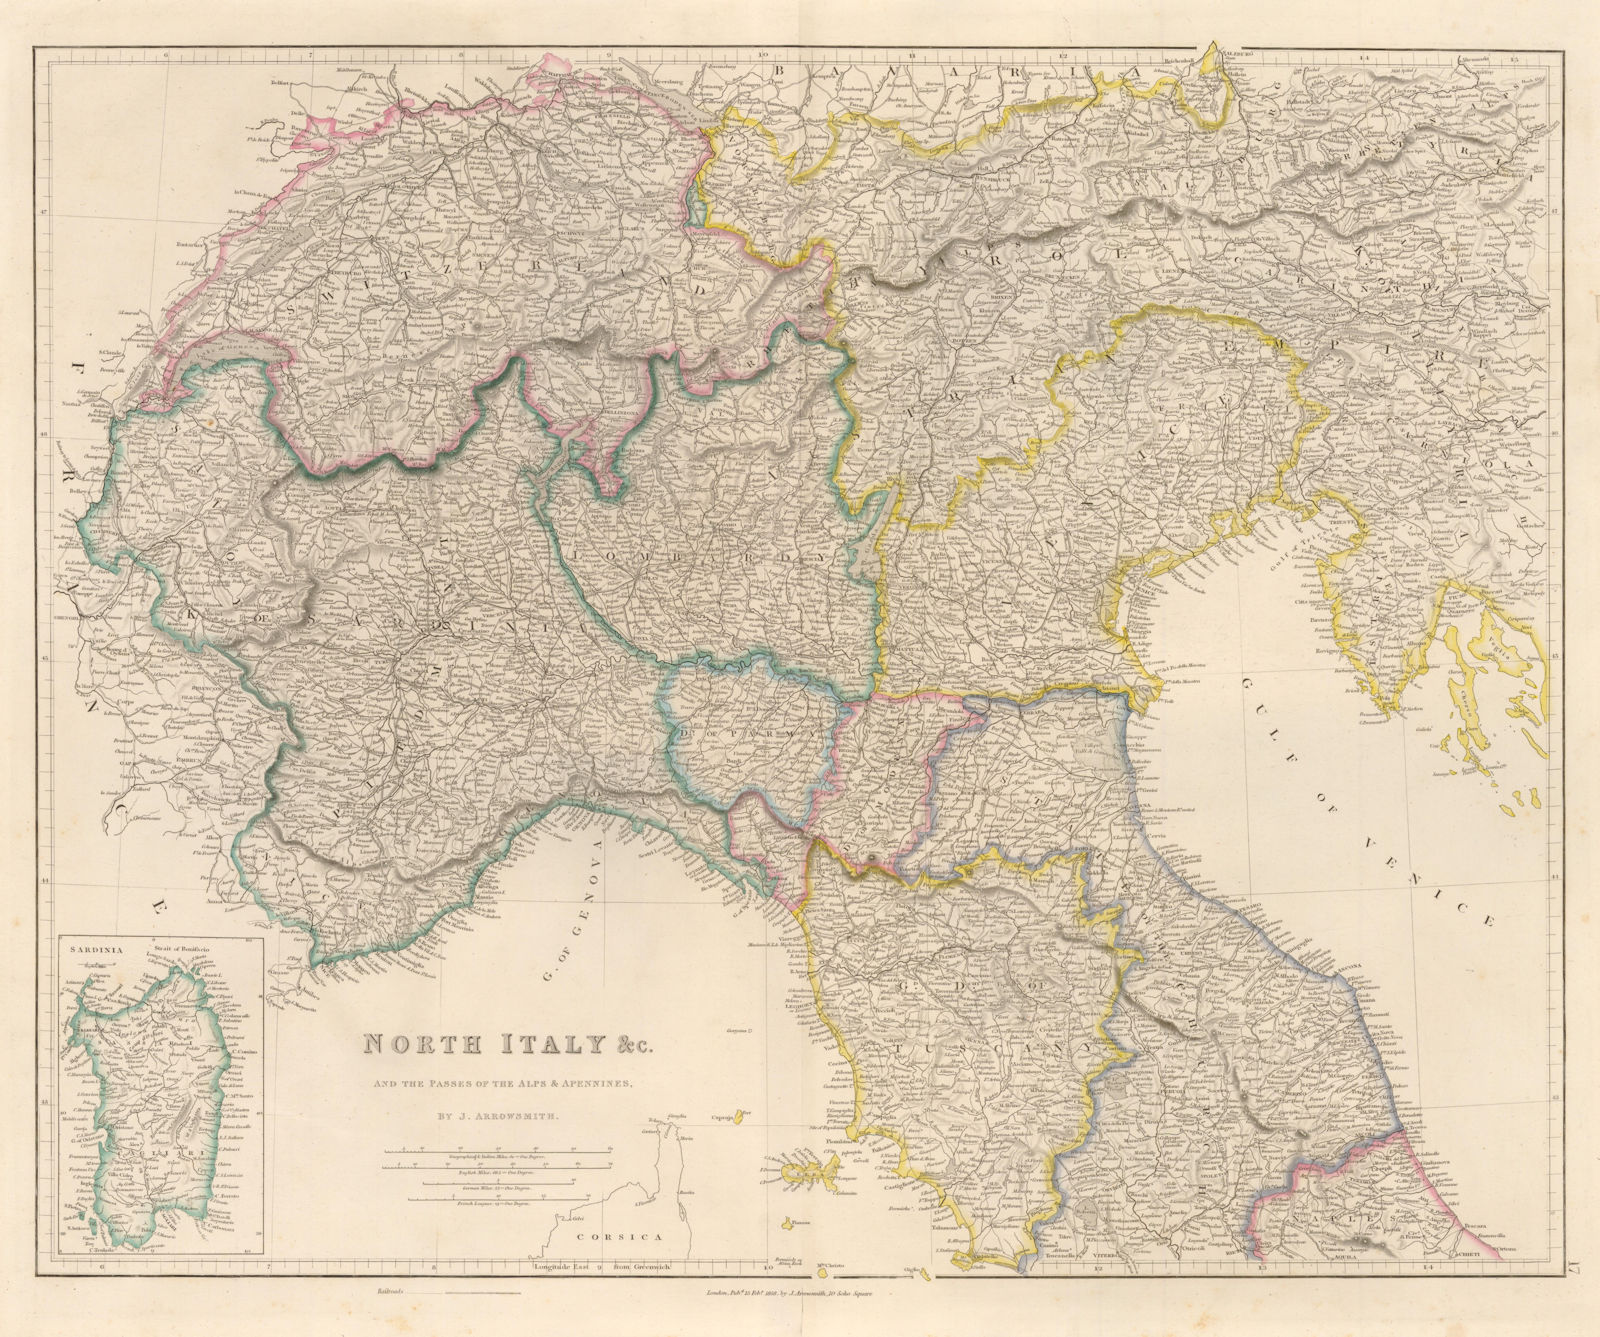 Associate Product 'North Italy and the Passes of the Alps & Apennines' by J. Arrowsmith 1858 map